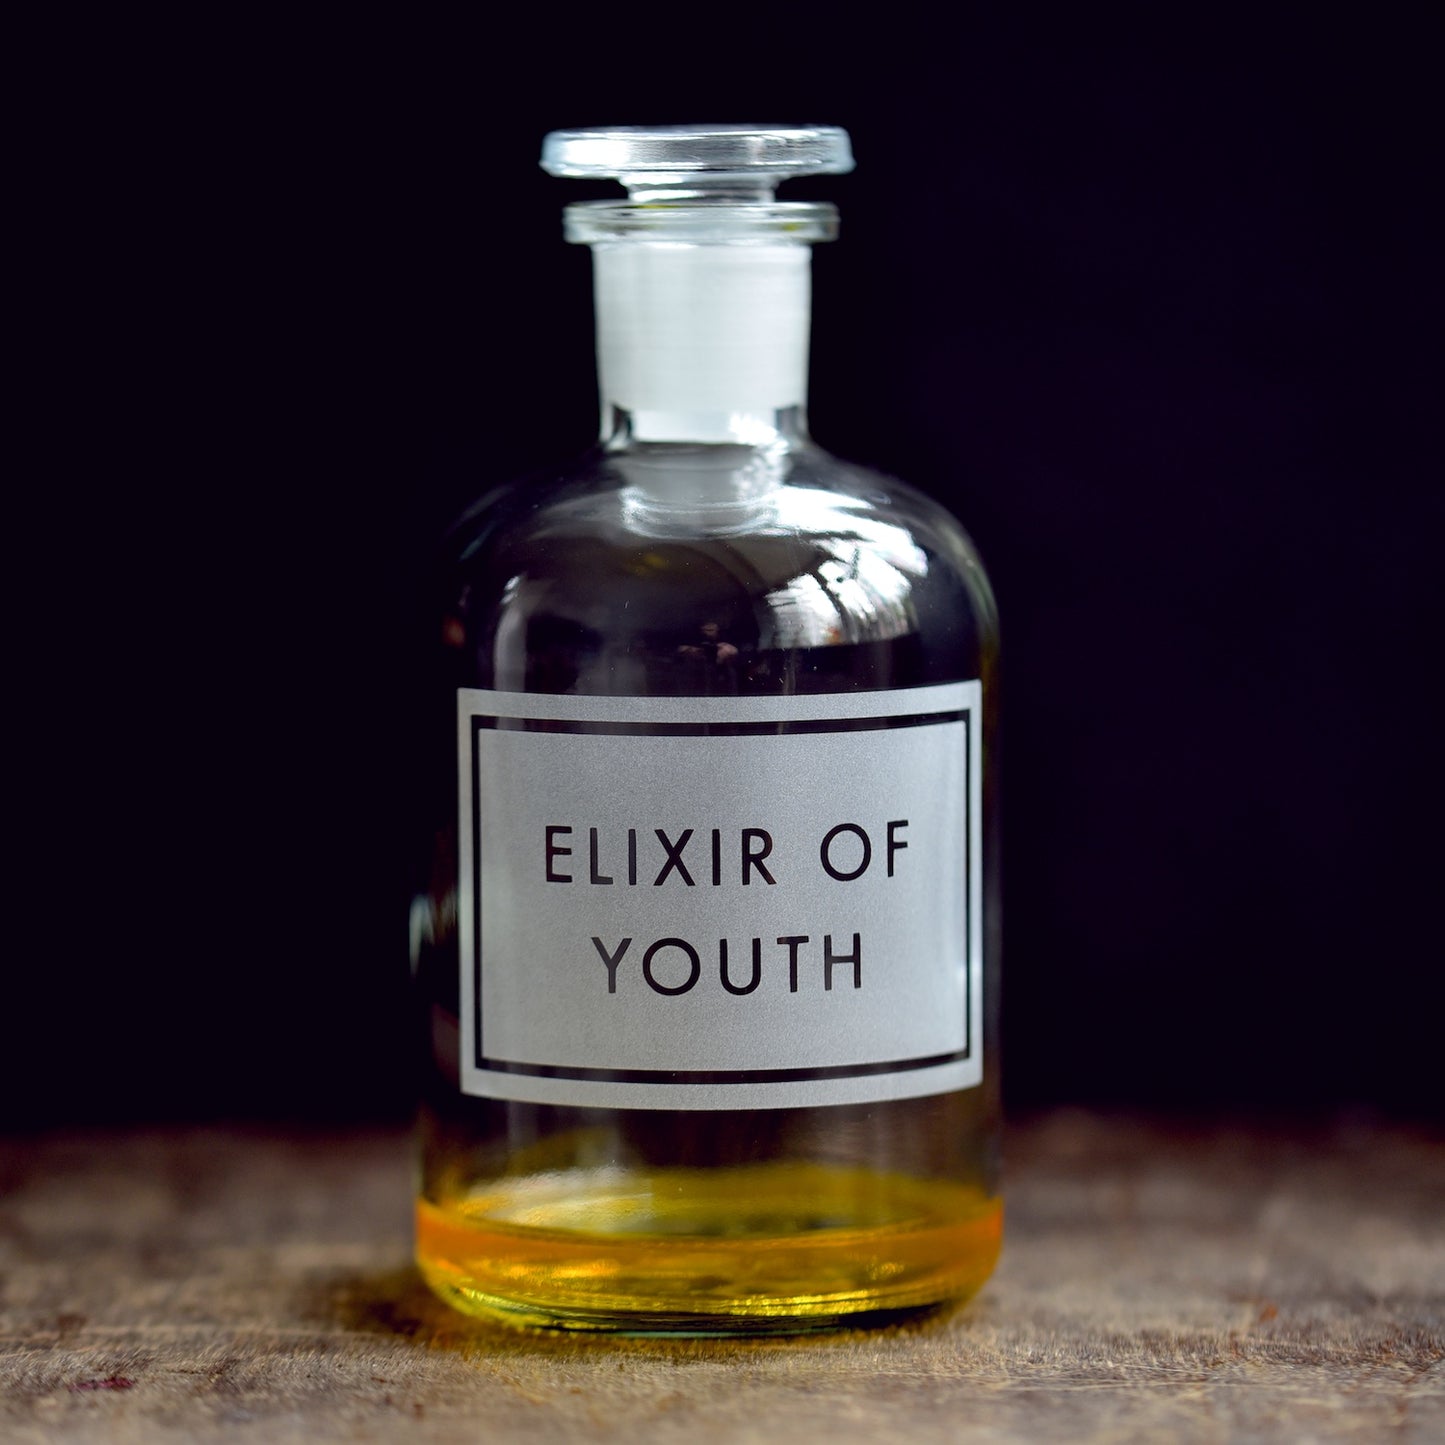 'Elixir of Youth' etched glass apothecary bottle